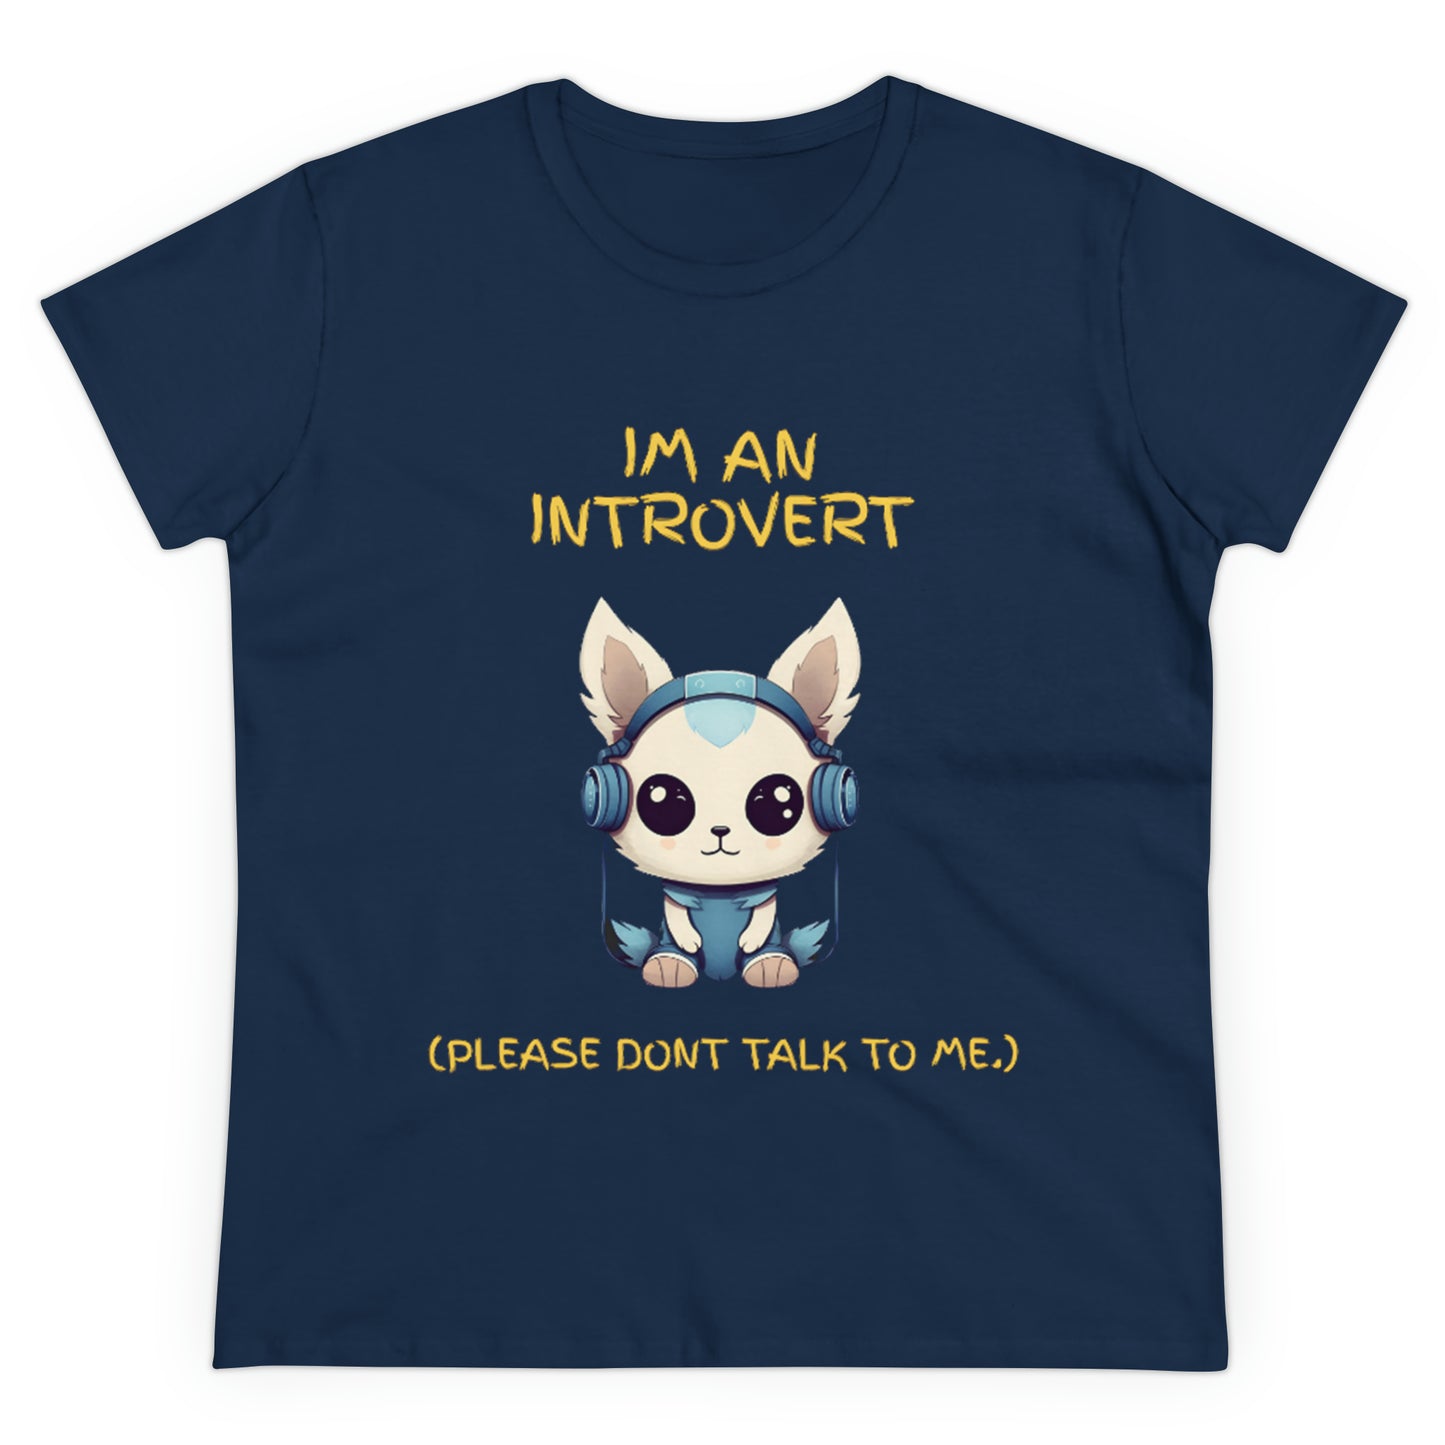 I'm an Introvert - Women's Semi-Fitted Tee